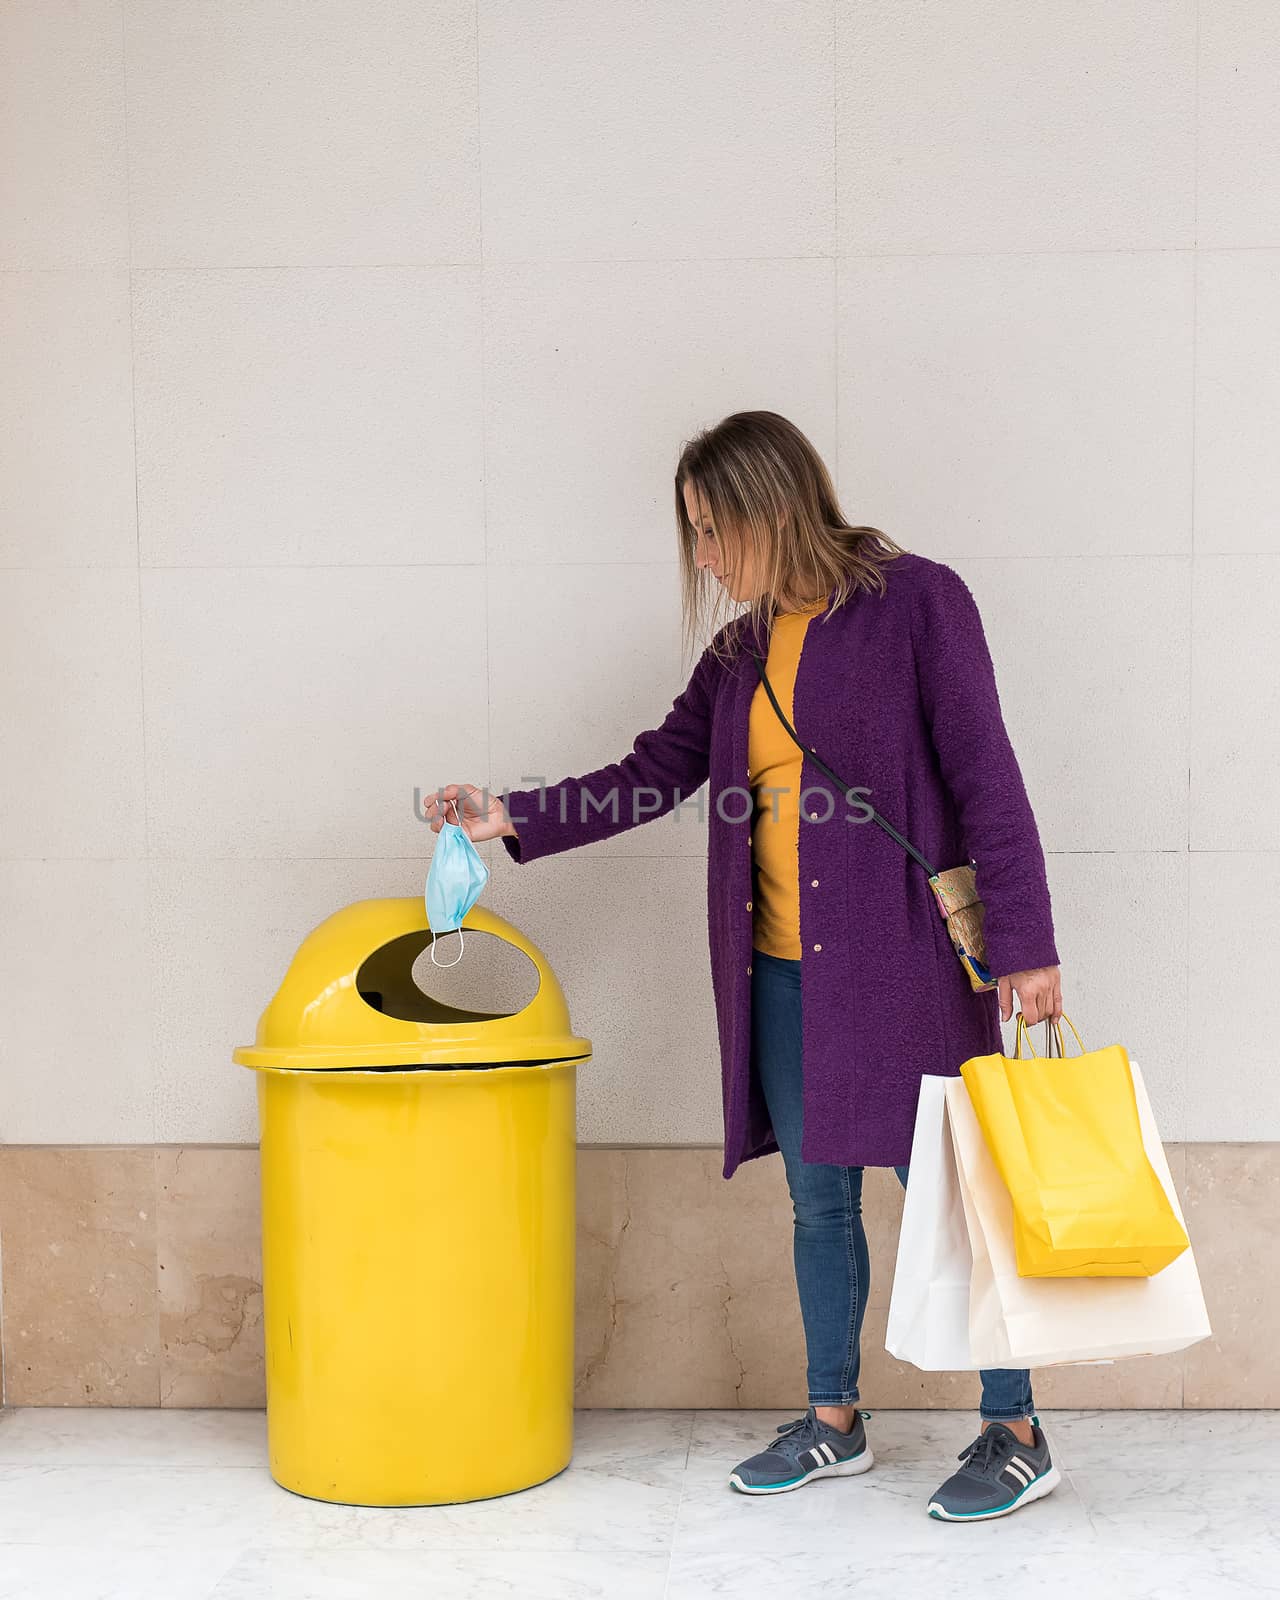 Middle-aged blonde woman throwing a face mask into a yellow garbage can while holding shopping bags